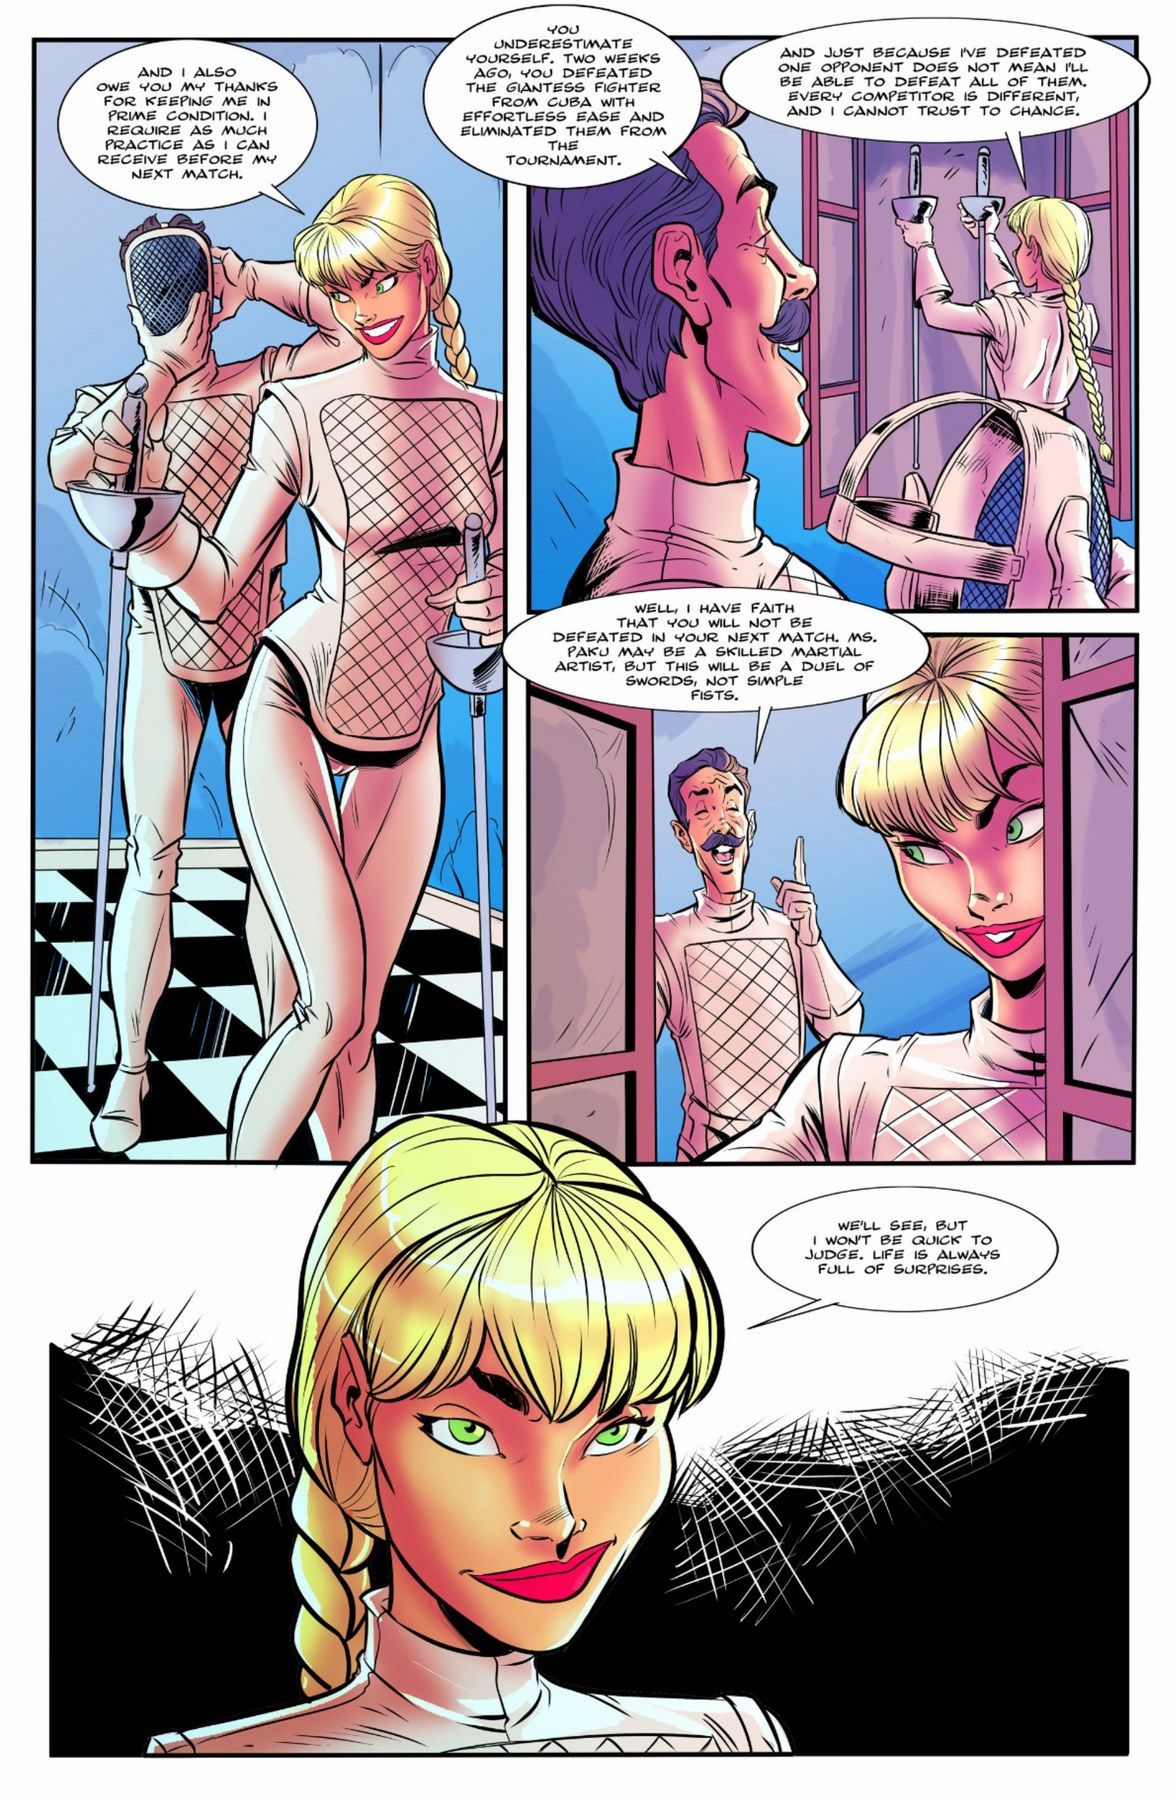 The Giantess Fight Round One Issue 3 page 5